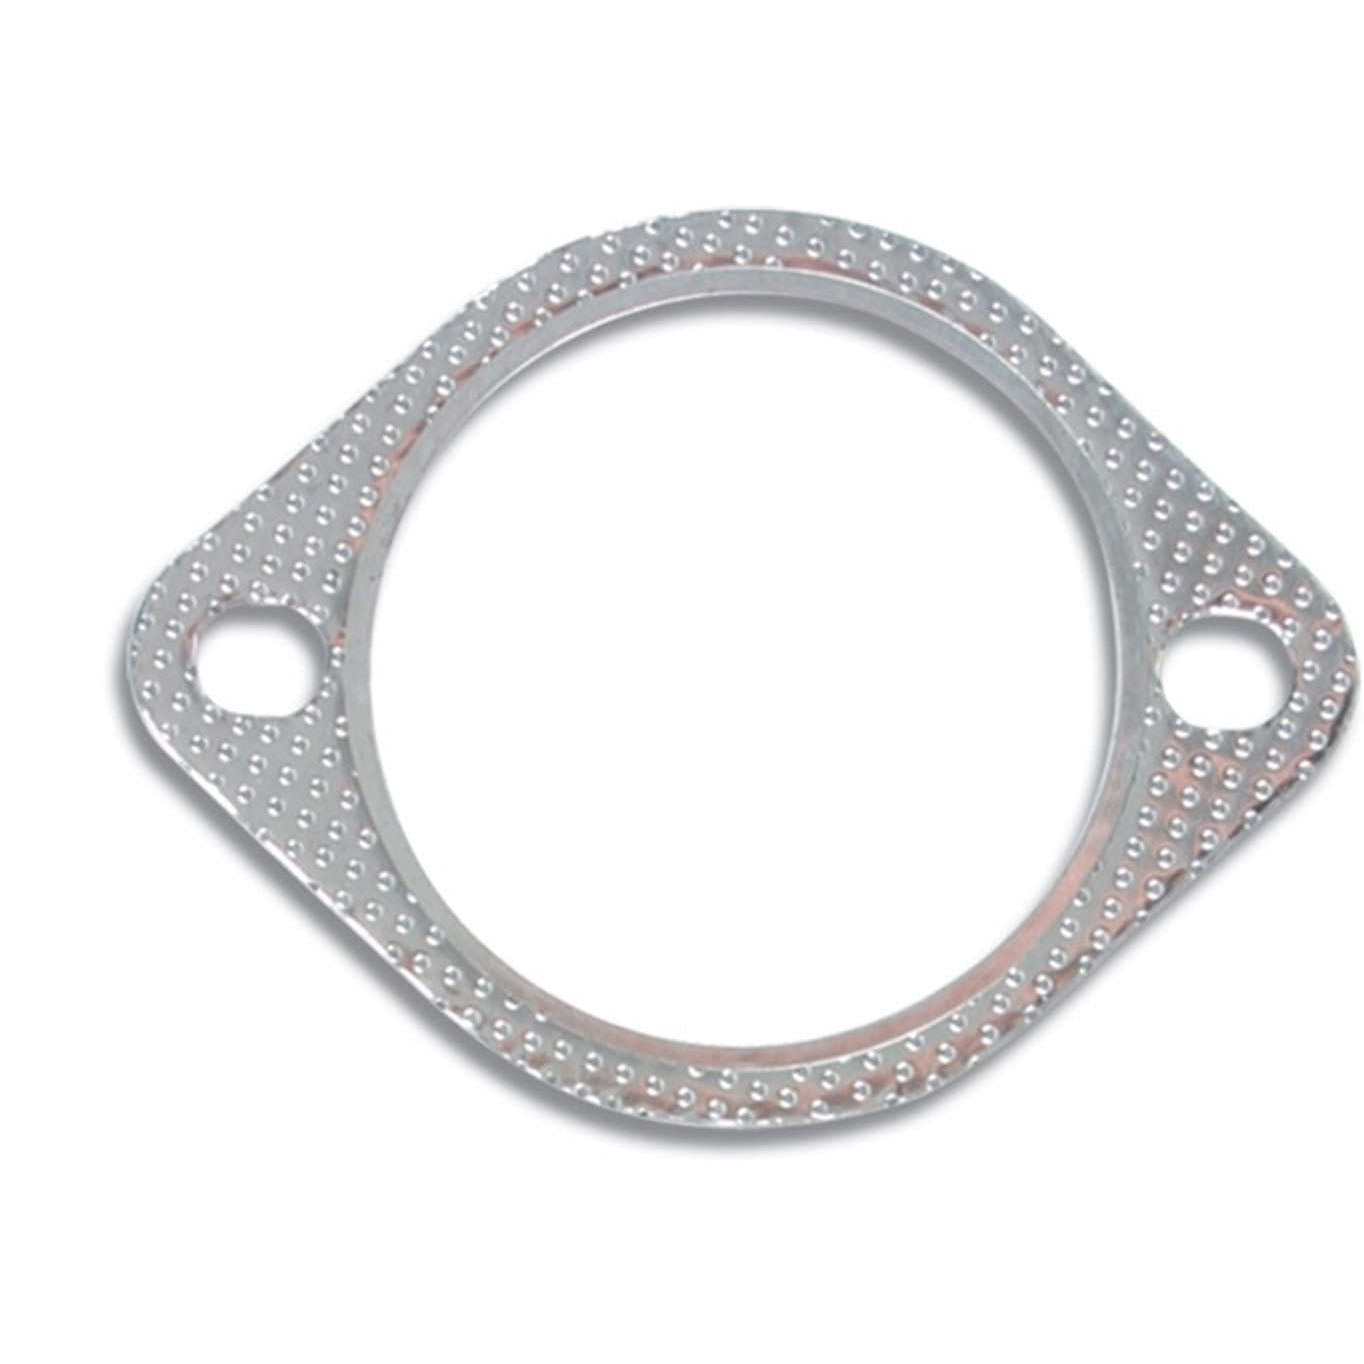 Vibrant 2.5 Inch 2 hole Gasket